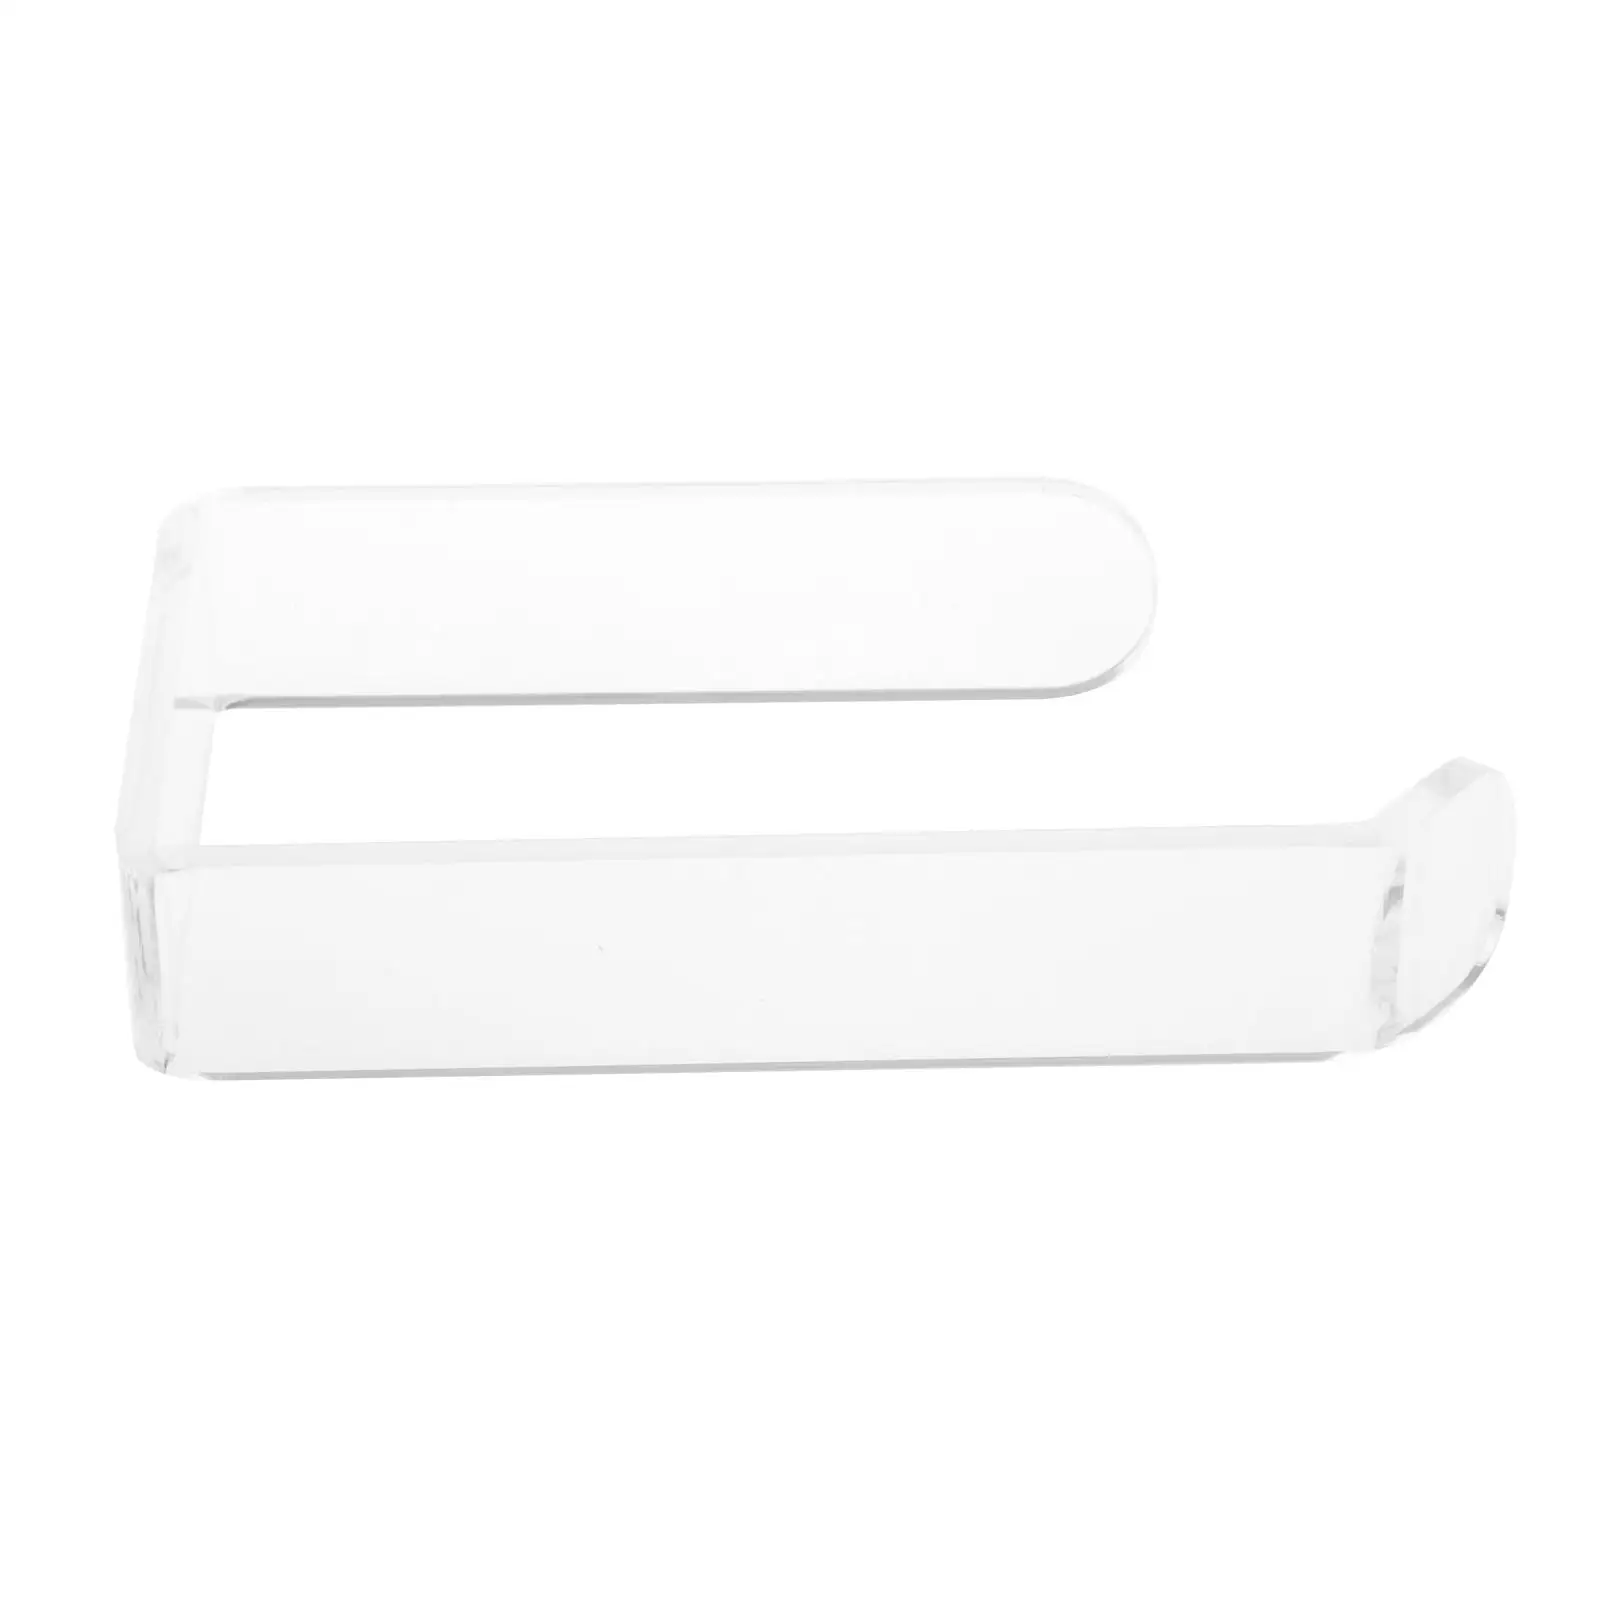 Acrylic Transparent Wall Mounted Toilet Paper, Kitchen Holder Roll Hanger, Home